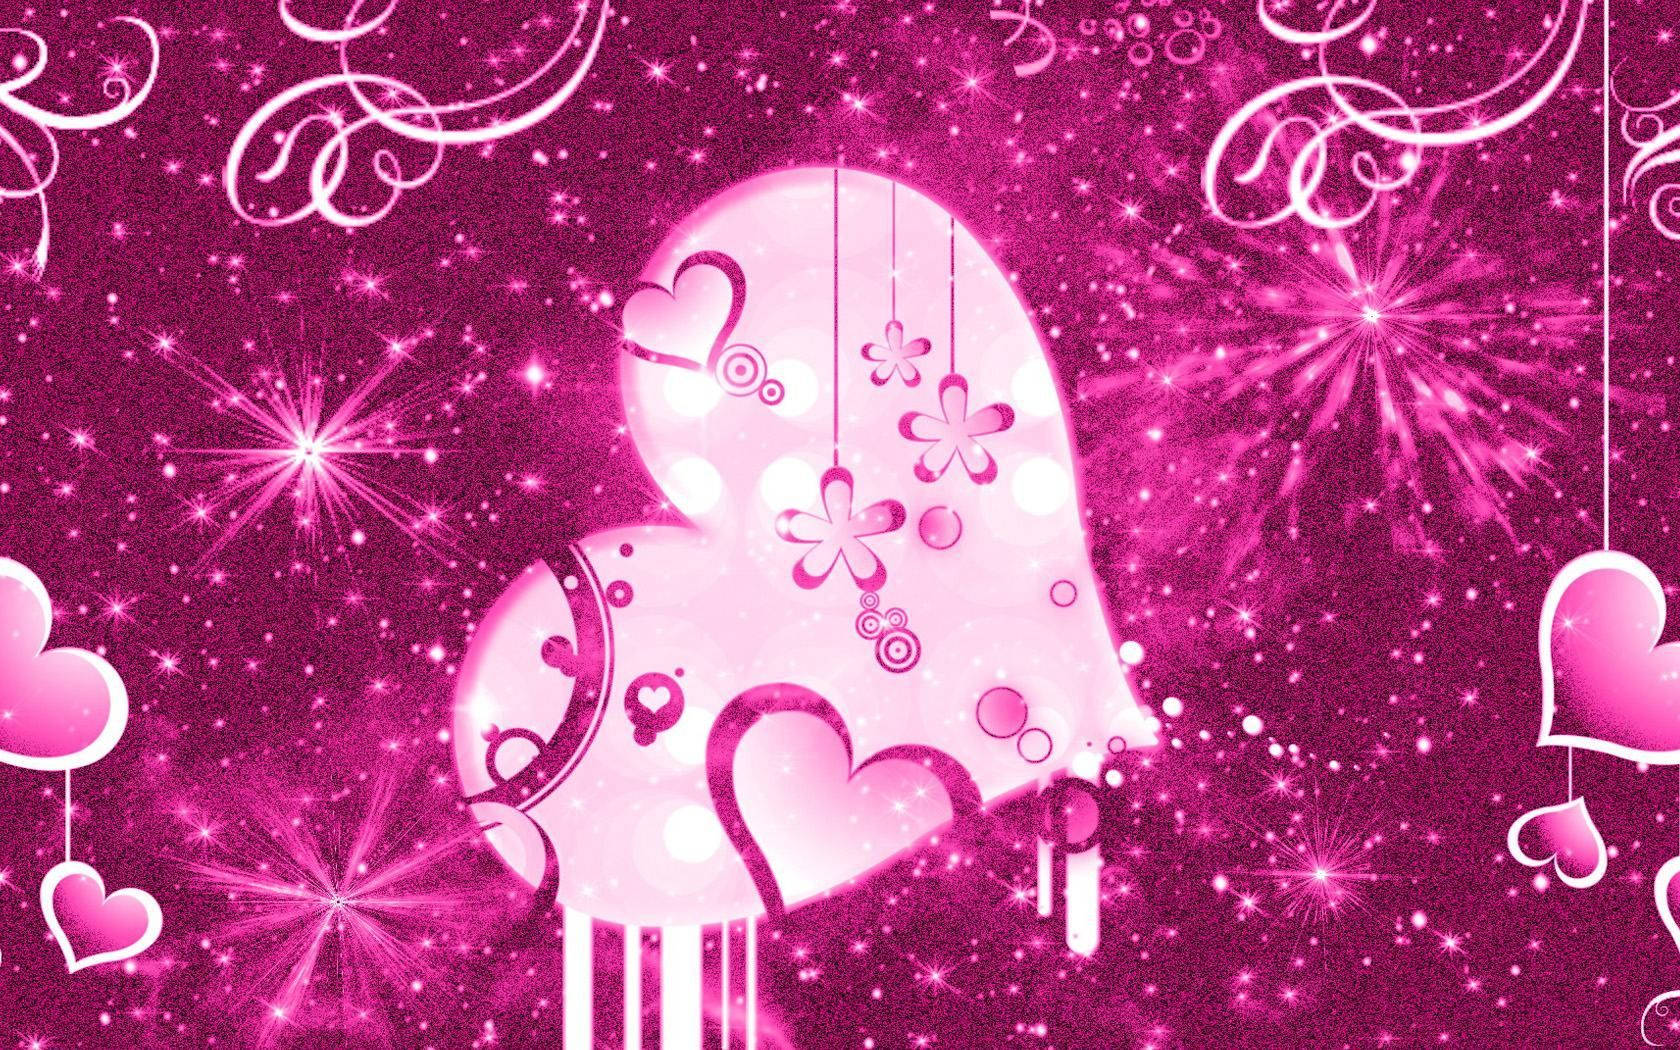 Spread Love With Girly Purple Glitter Hearts Background